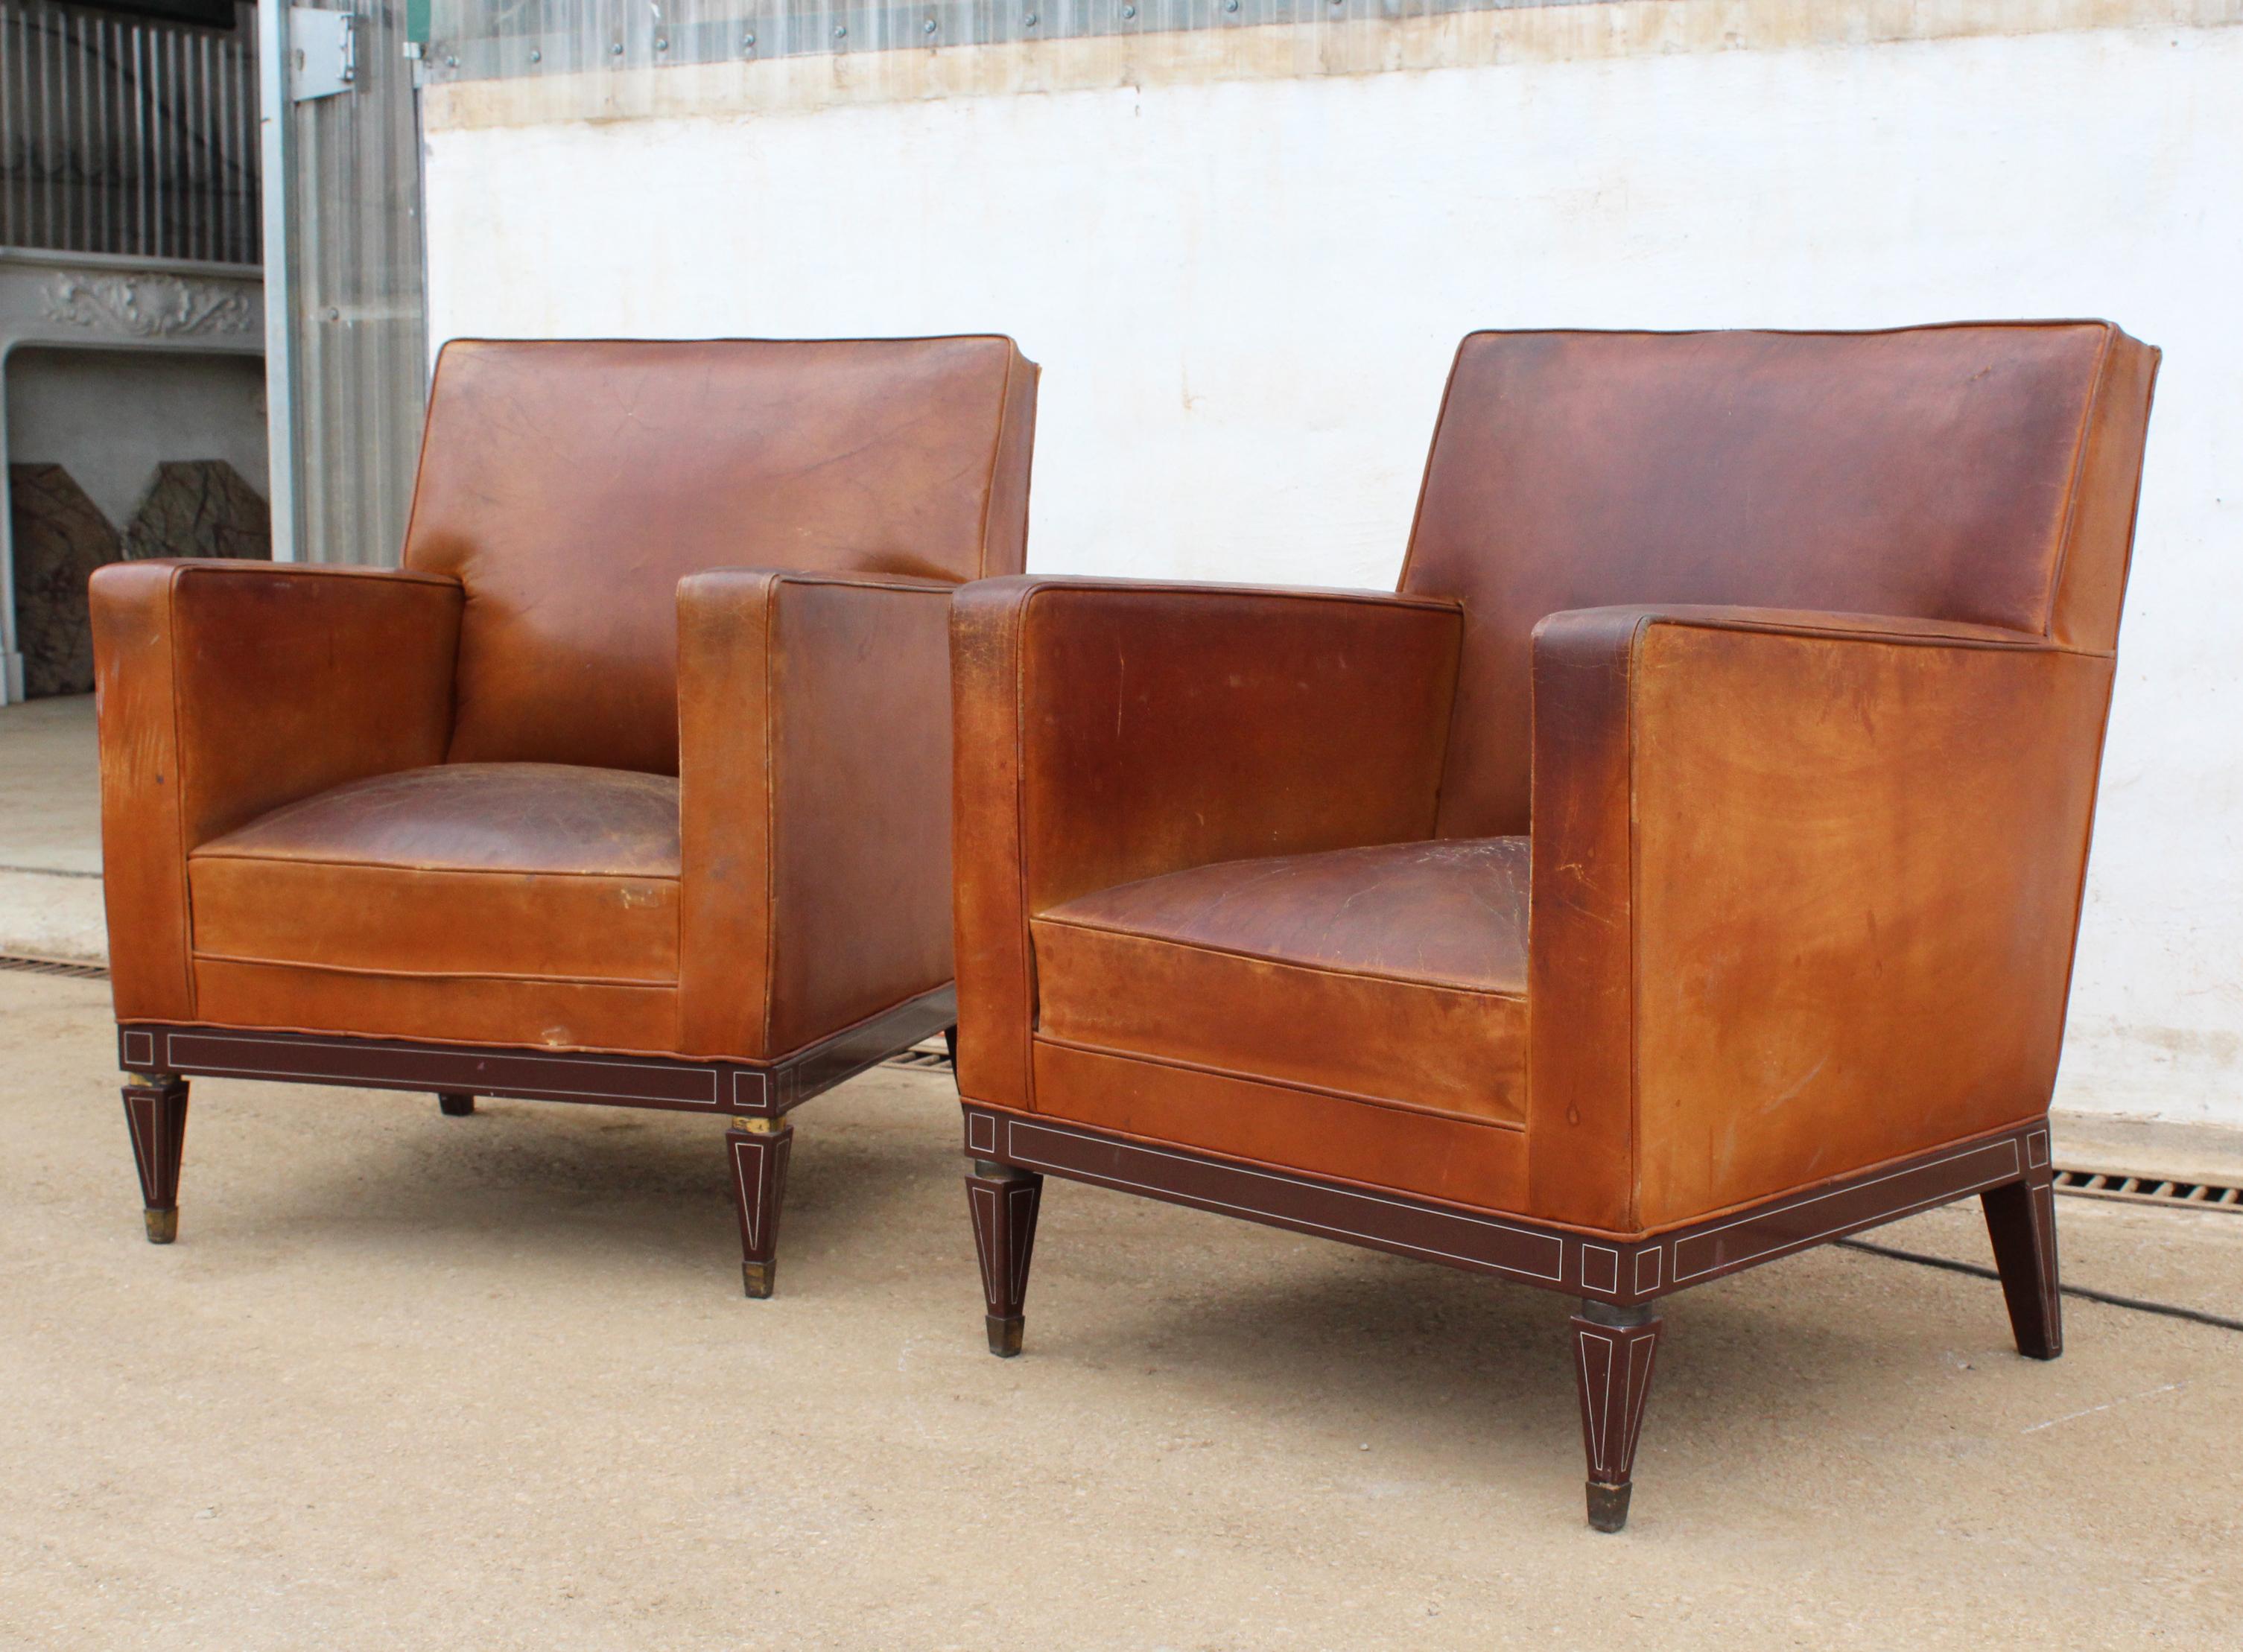 1950s pair of Spanish leather armchairs with metal structure by Sistemas AF S.A. in Madrid.
   